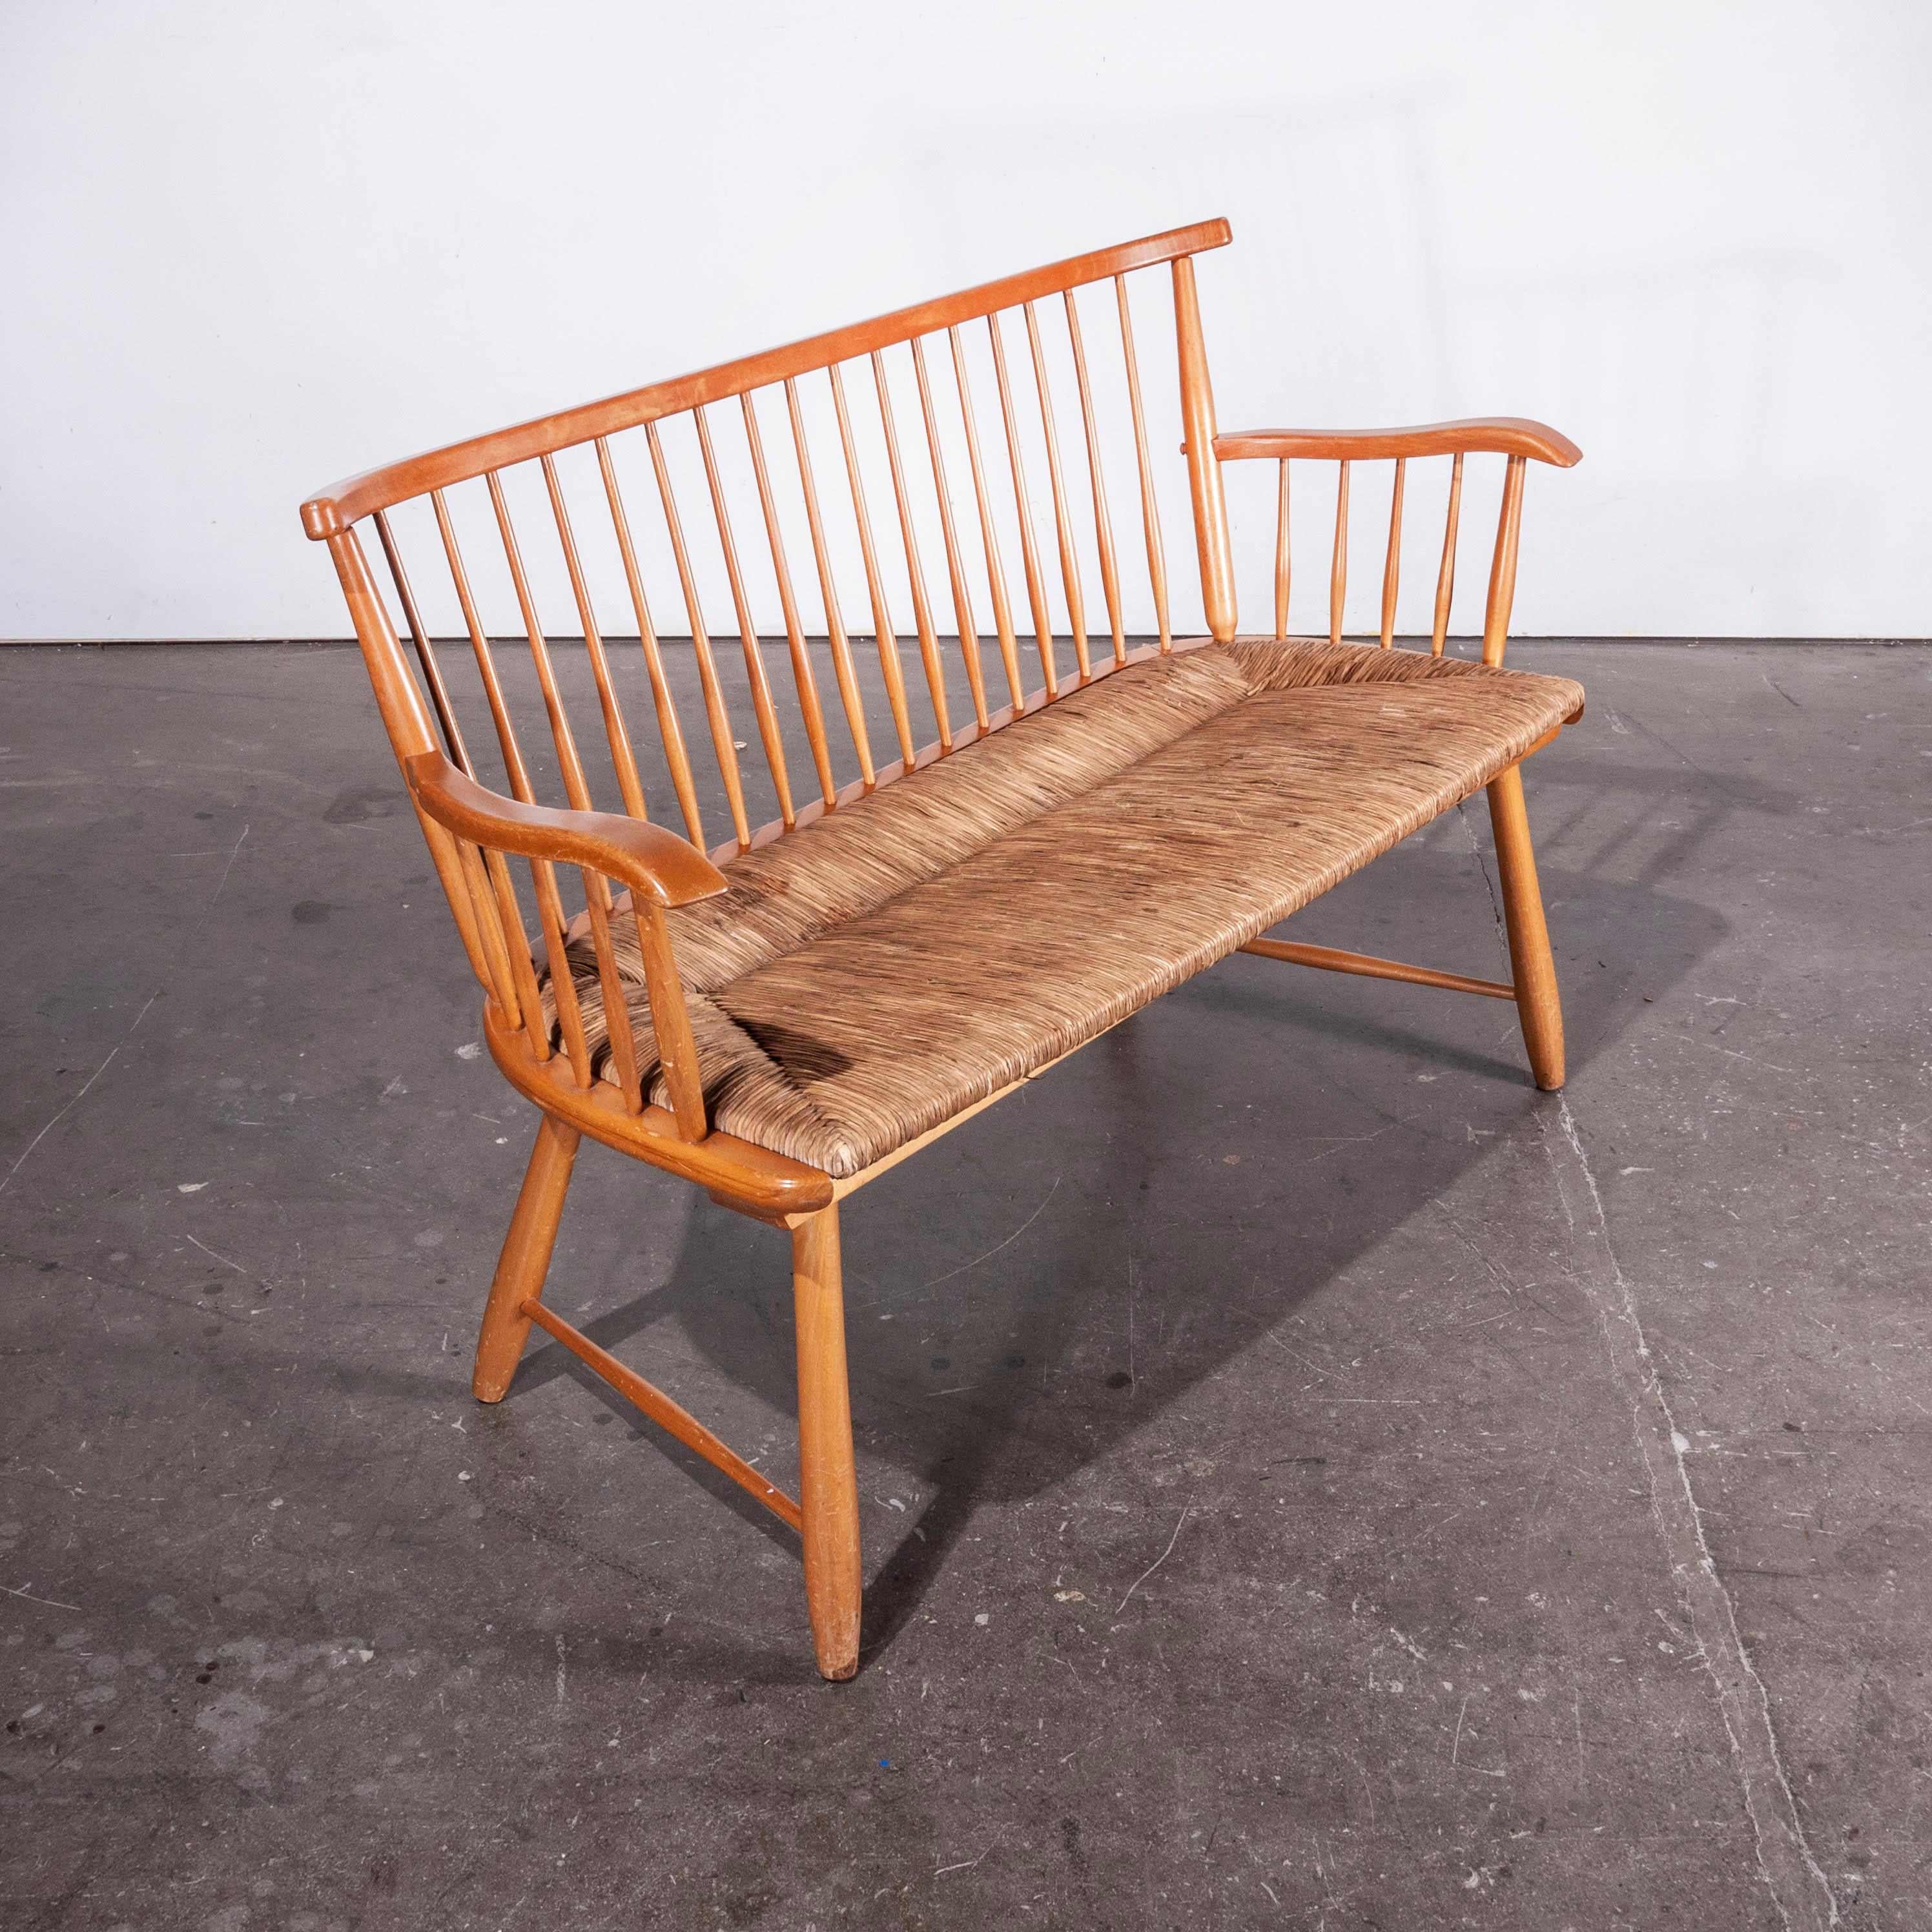 1950s beech bench – sofa and chair set with rush seats – Arno Lambrecht for WK Mobel
1950s beech bench – sofa and chair set with rush seats. This set is in exceptional original condition, designed by Arno Lambrecht for WK Mobel. Strong beech frames